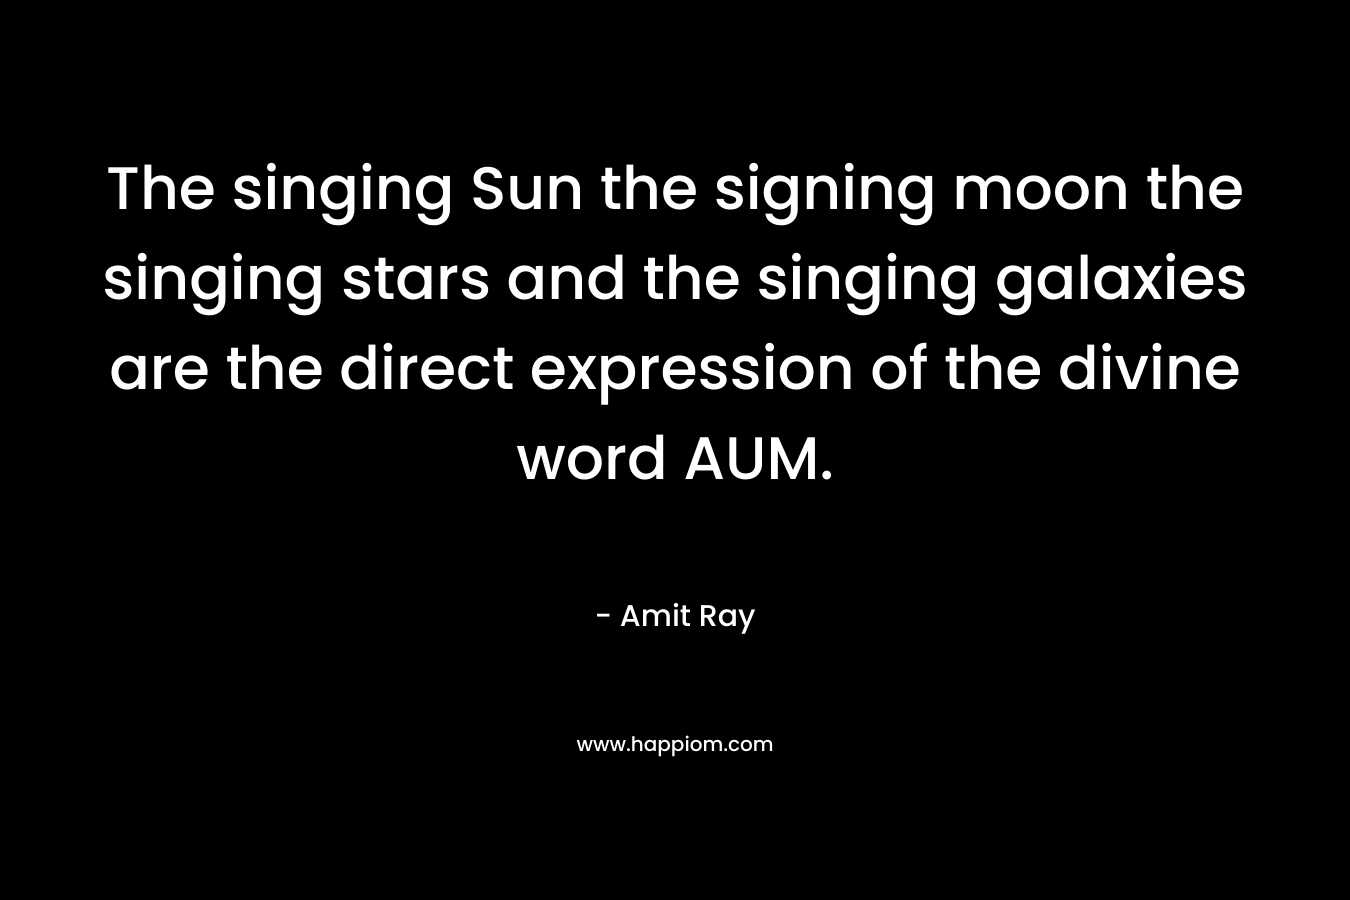 The singing Sun the signing moon the singing stars and the singing galaxies are the direct expression of the divine word AUM.